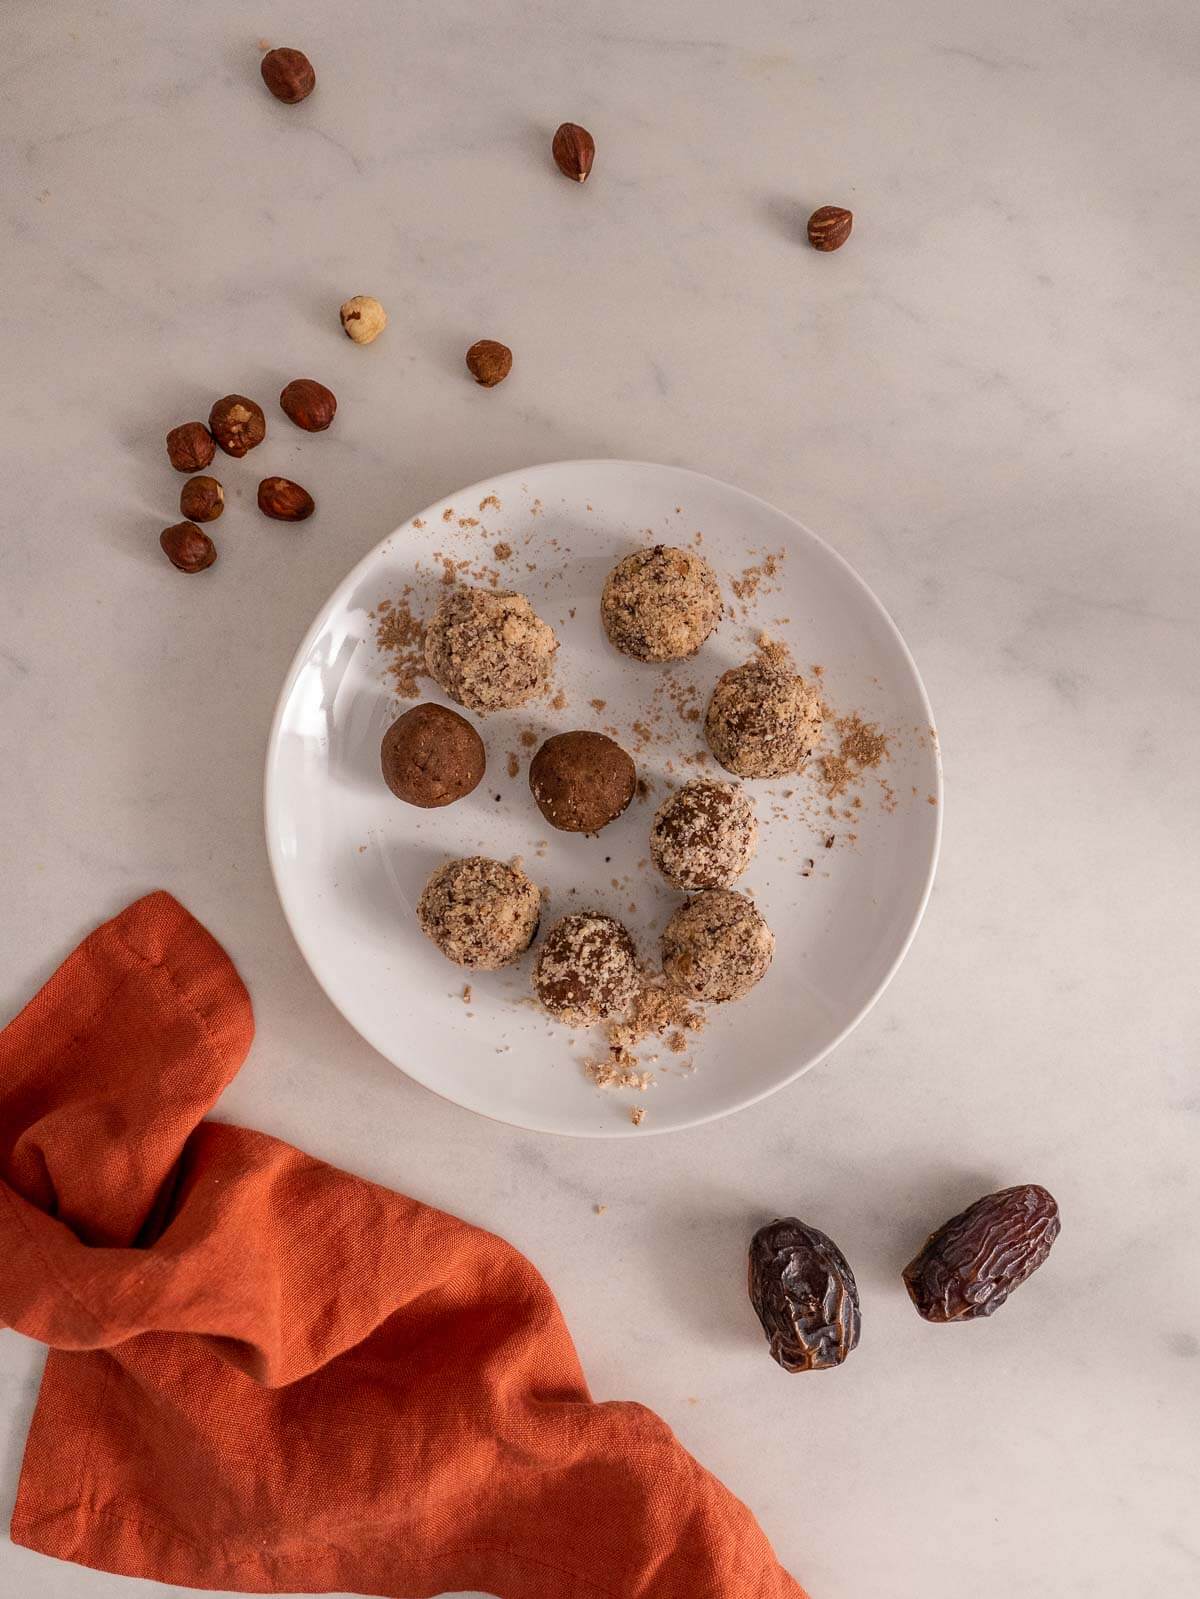 optionally roll the vegan protein balls over additional almond pulp or coconut flakes.